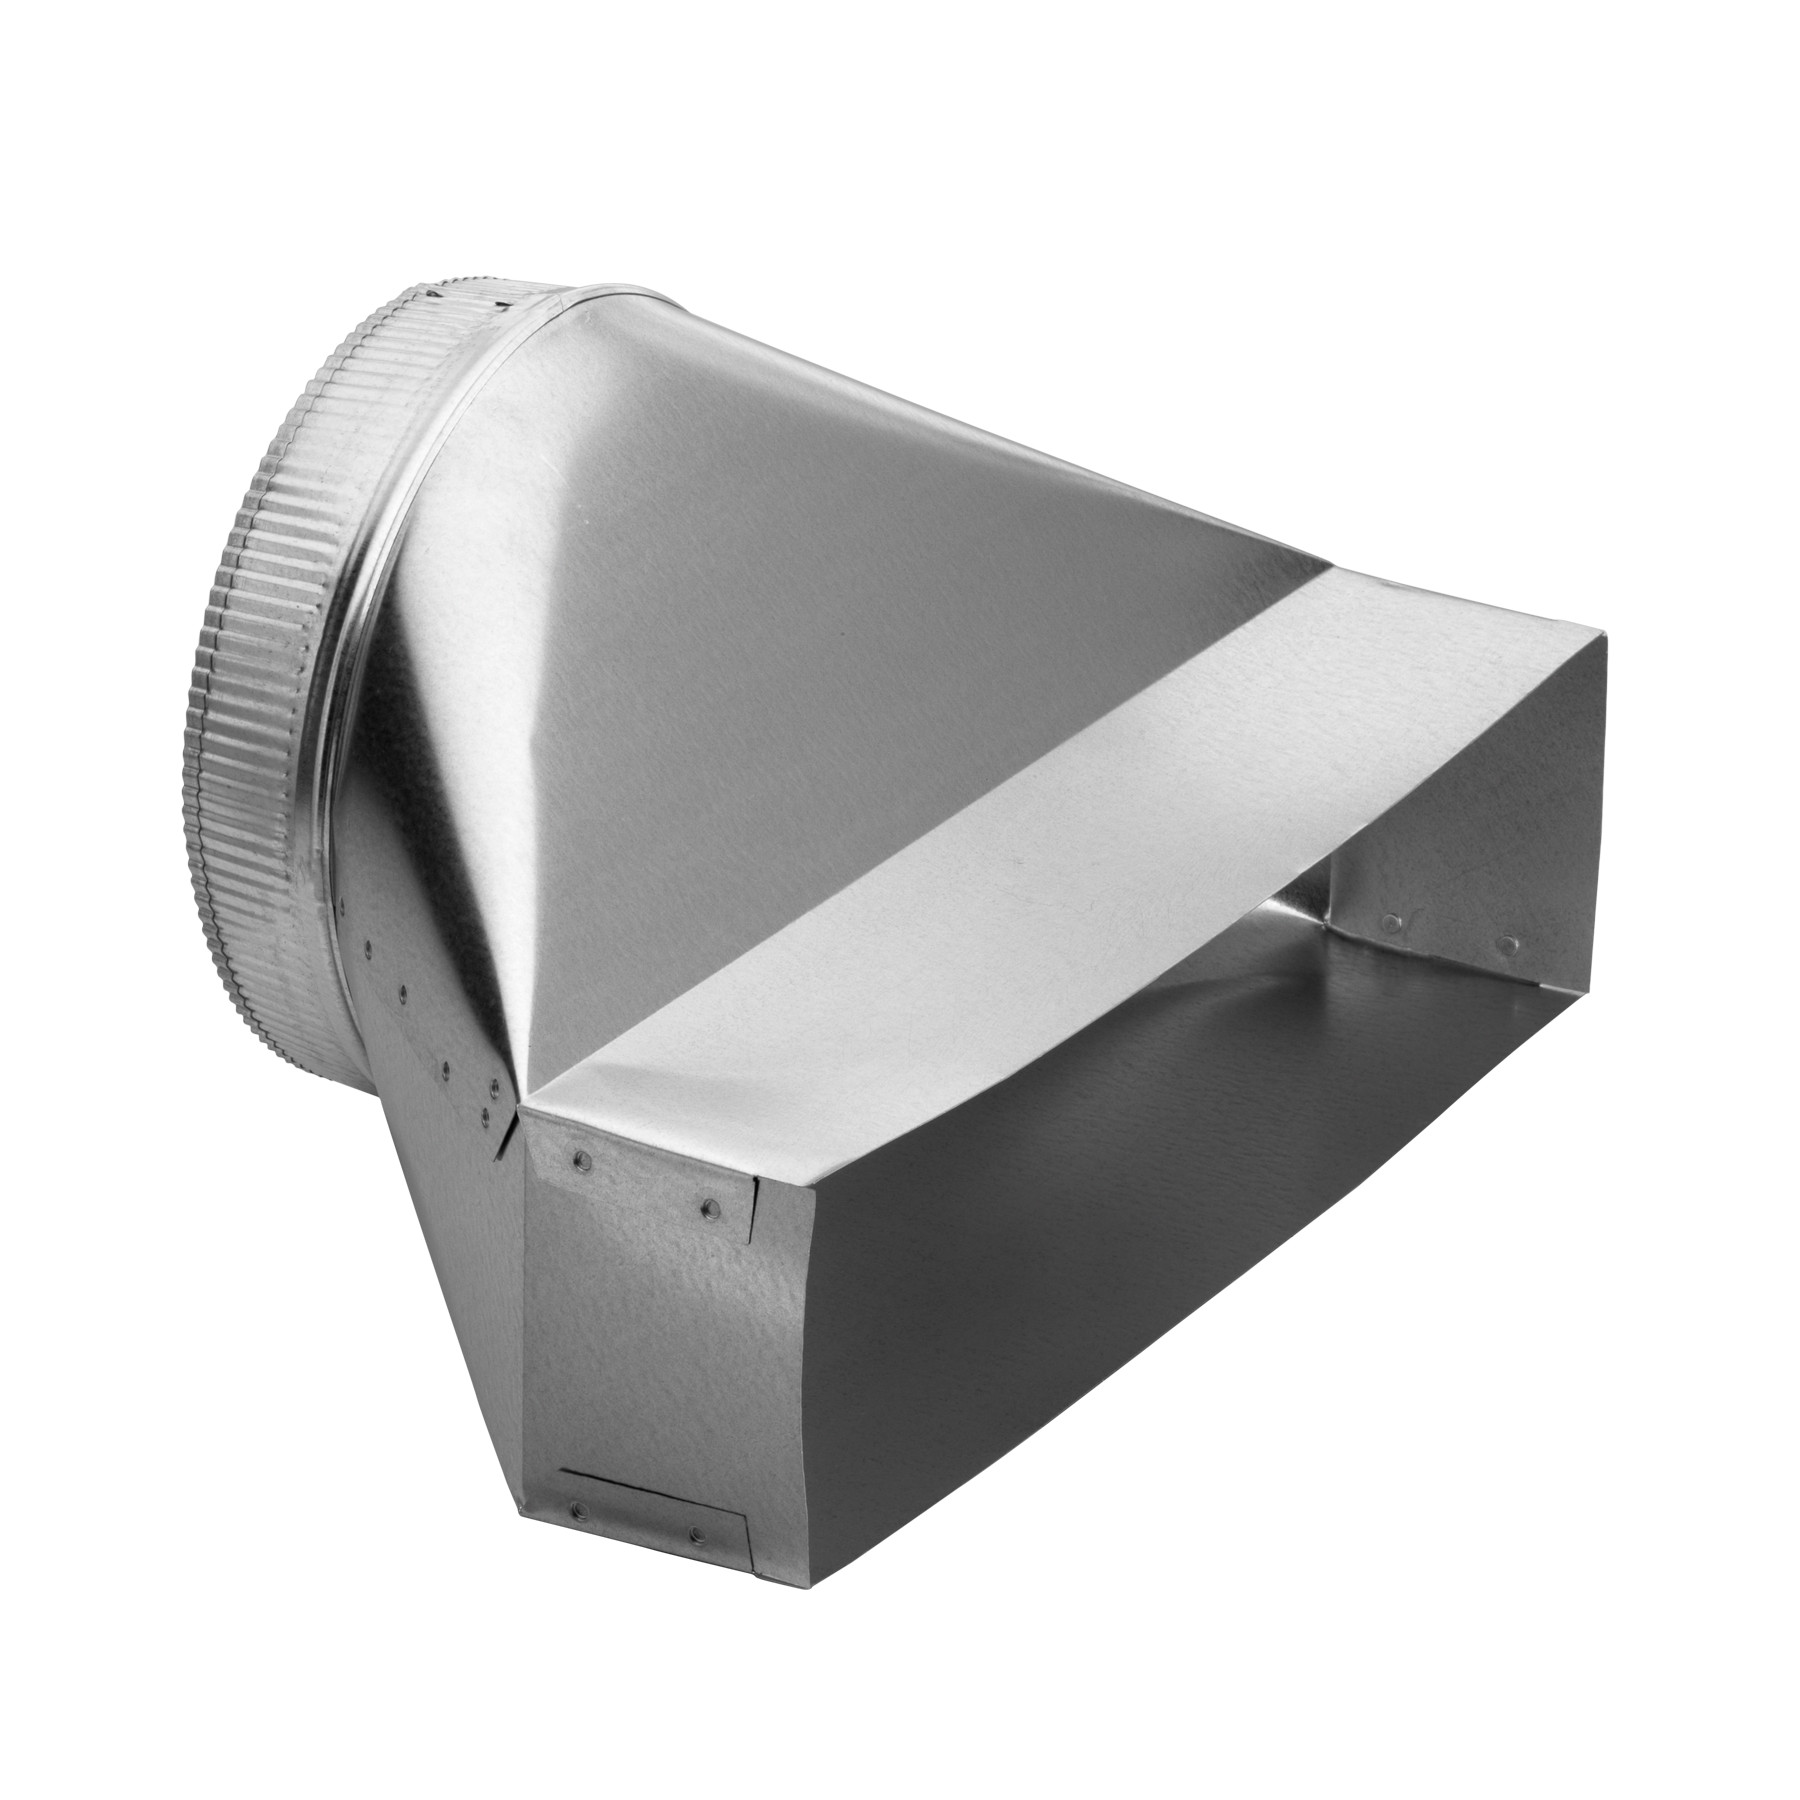 DISCONTINUED: 10-Inch Round to Rectangular Transition for Range Hoods and Bath Ventilation Fans